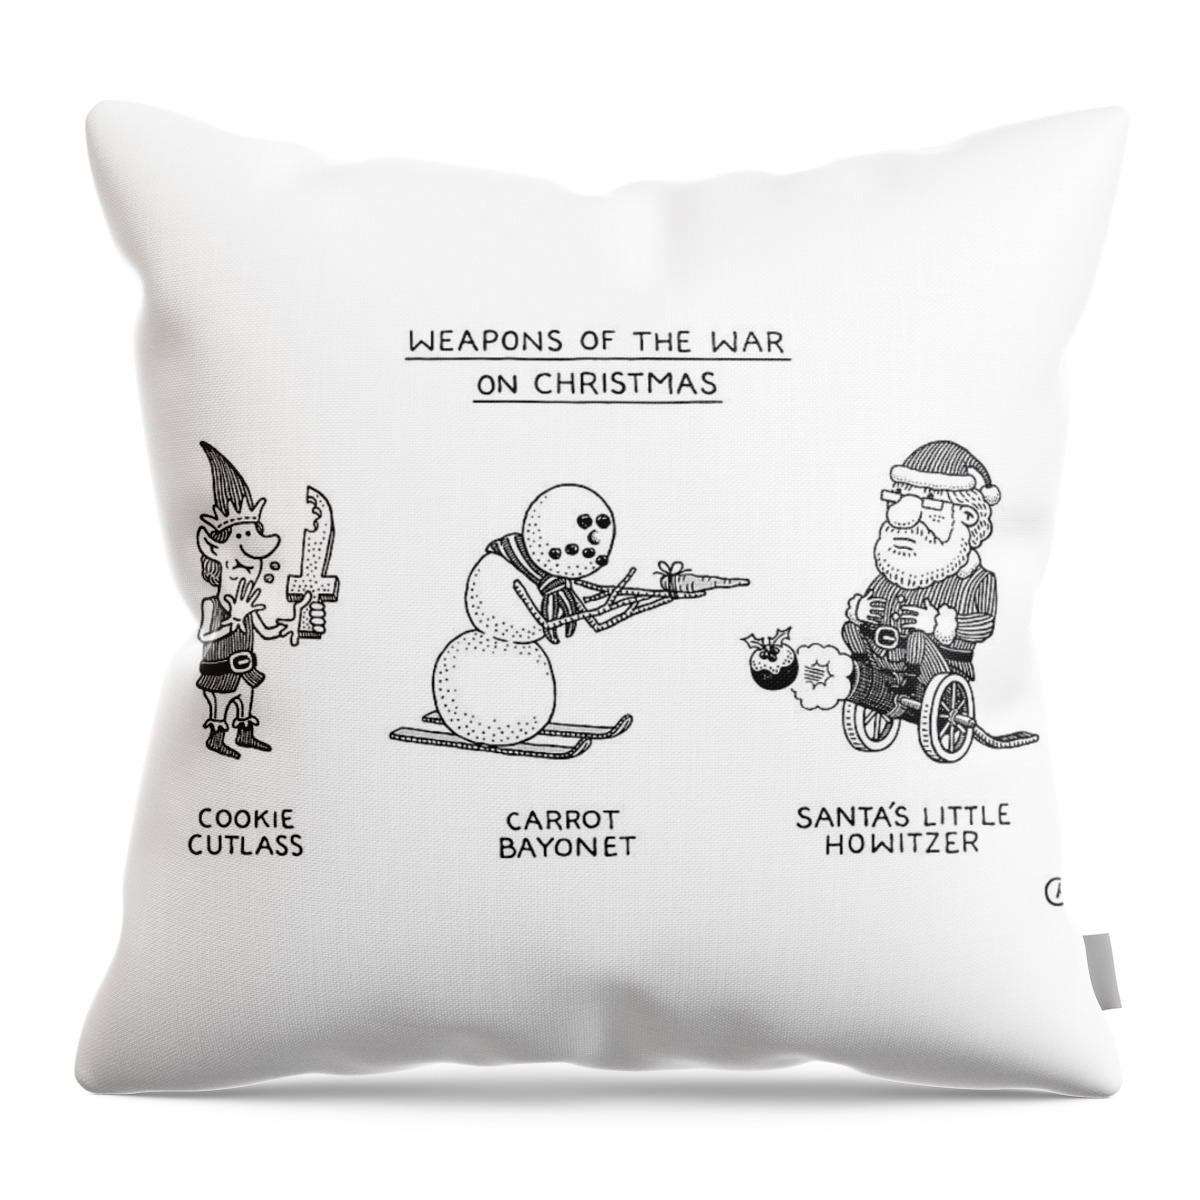 Weapons Of The War On Christmas Throw Pillow